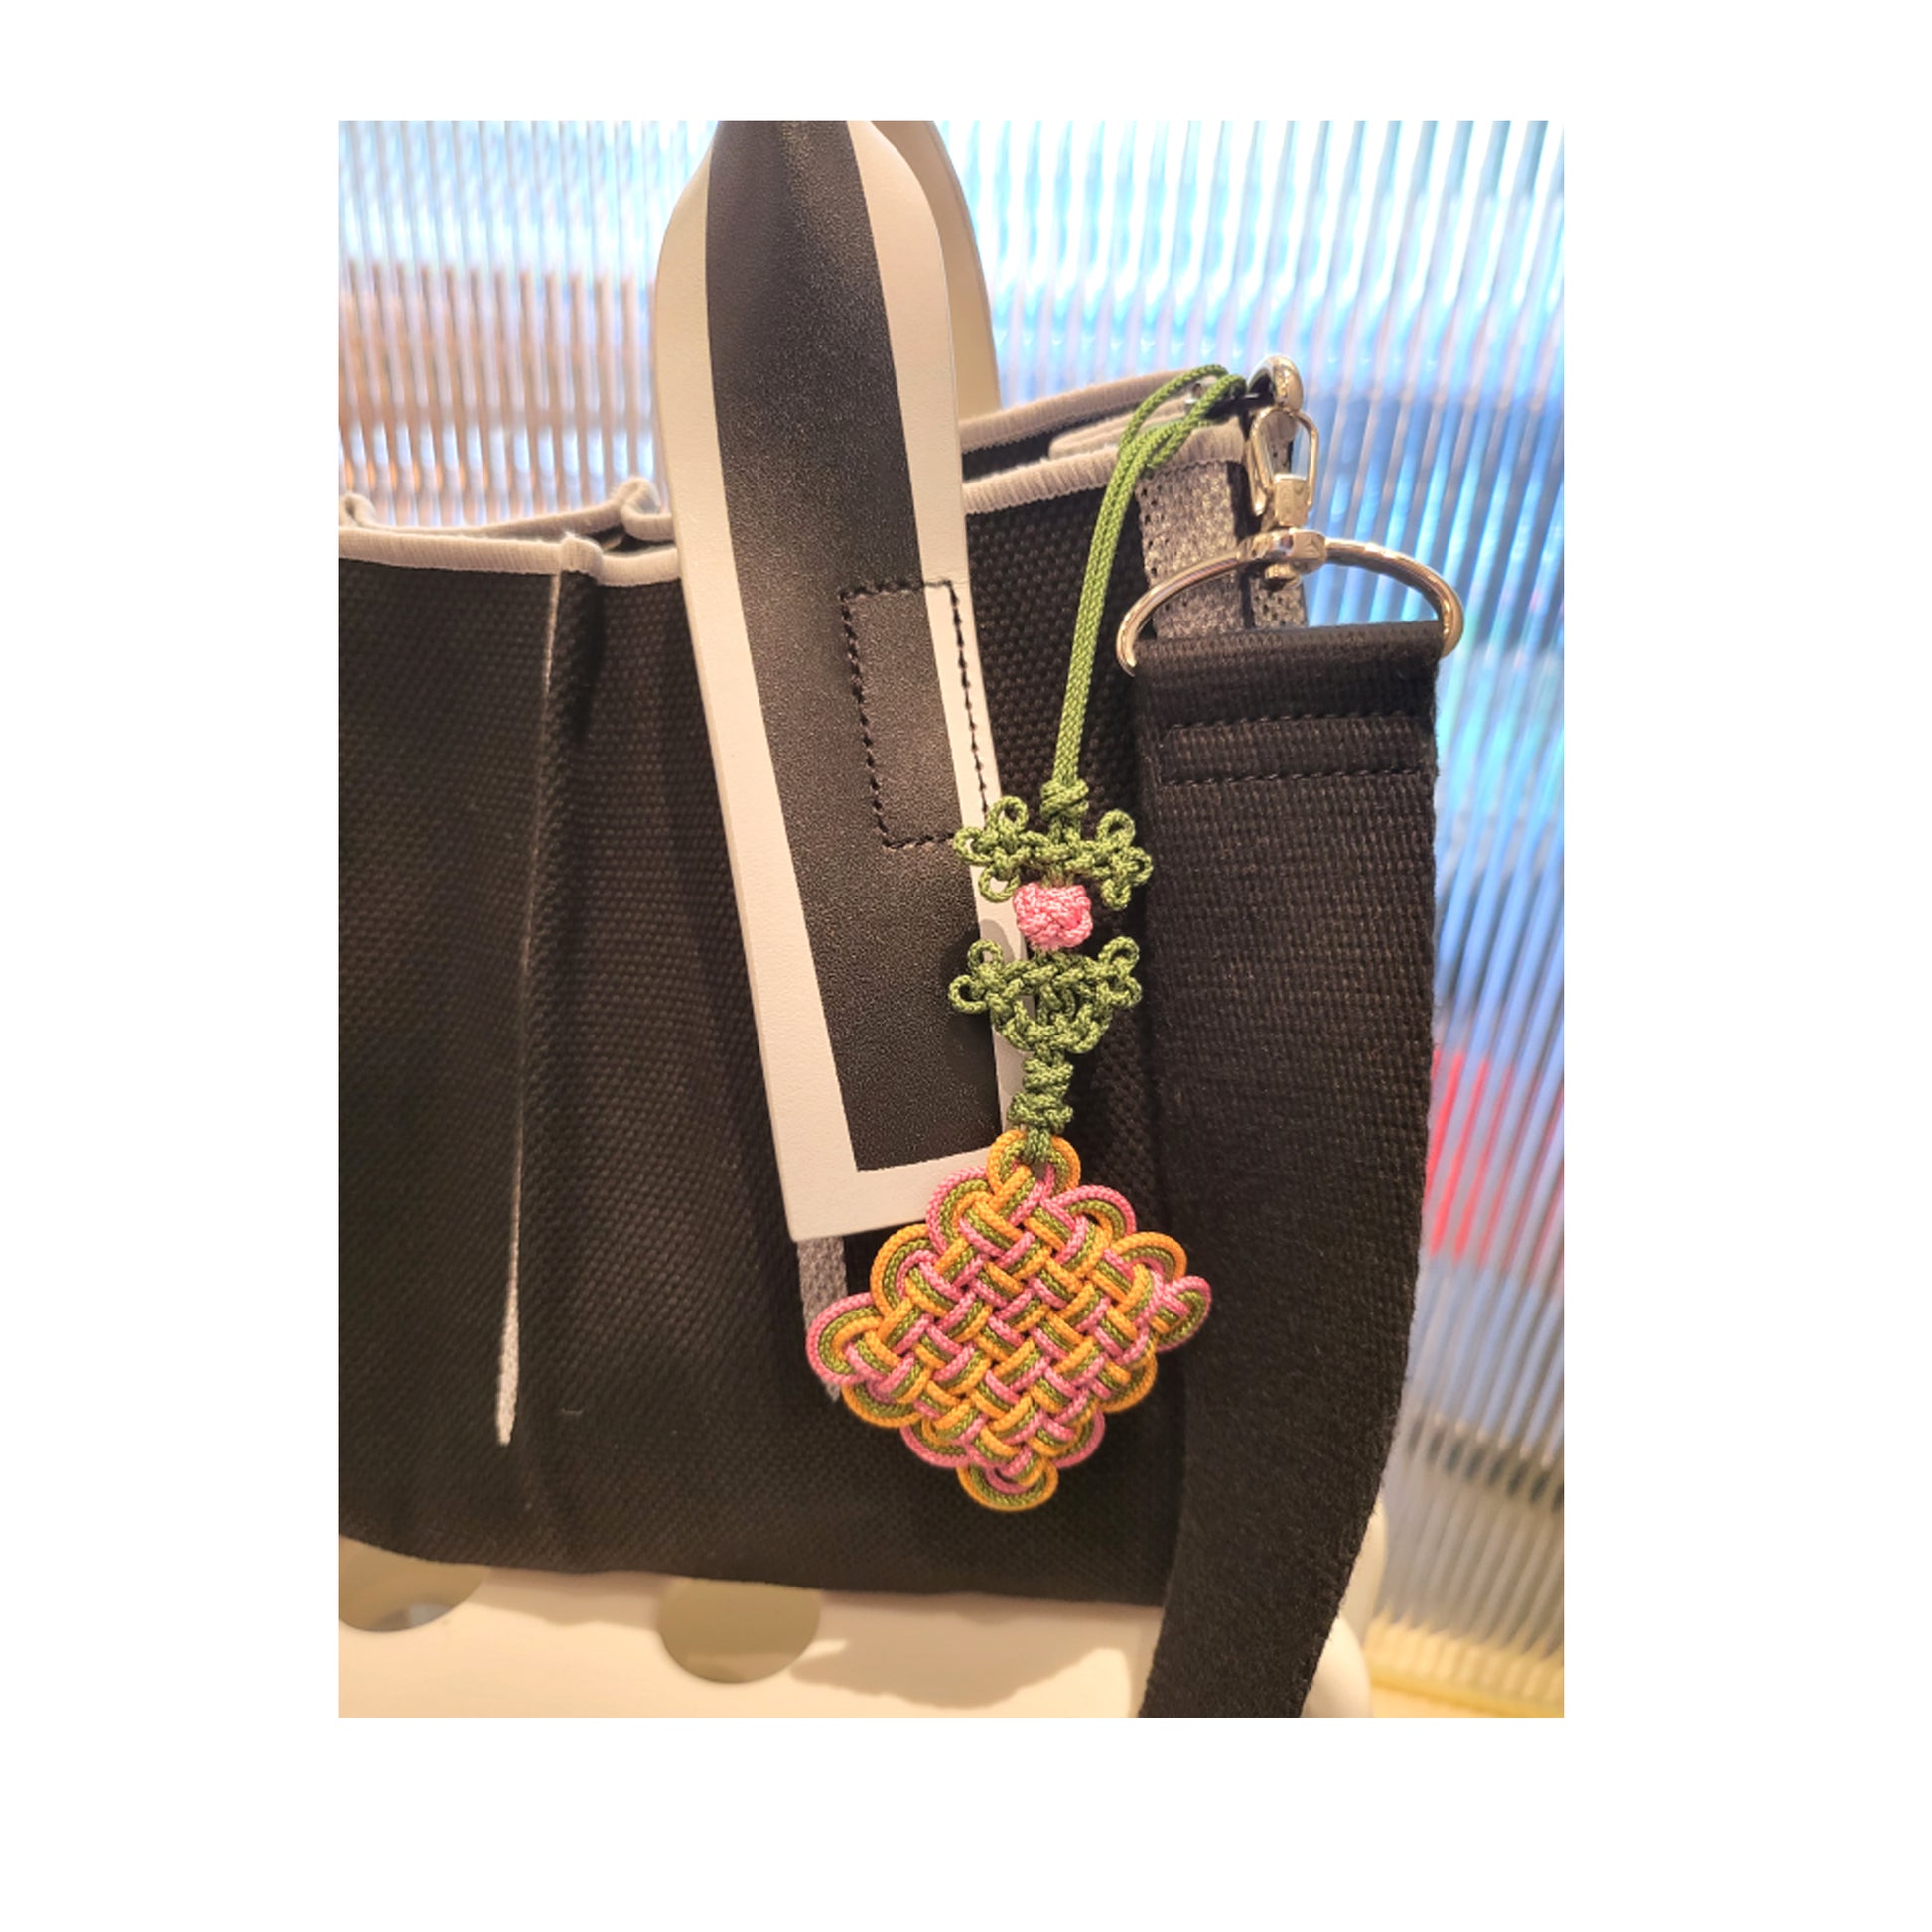 Korea Traditional Knot  keychain hanging from a bag. beautiful and unique charm